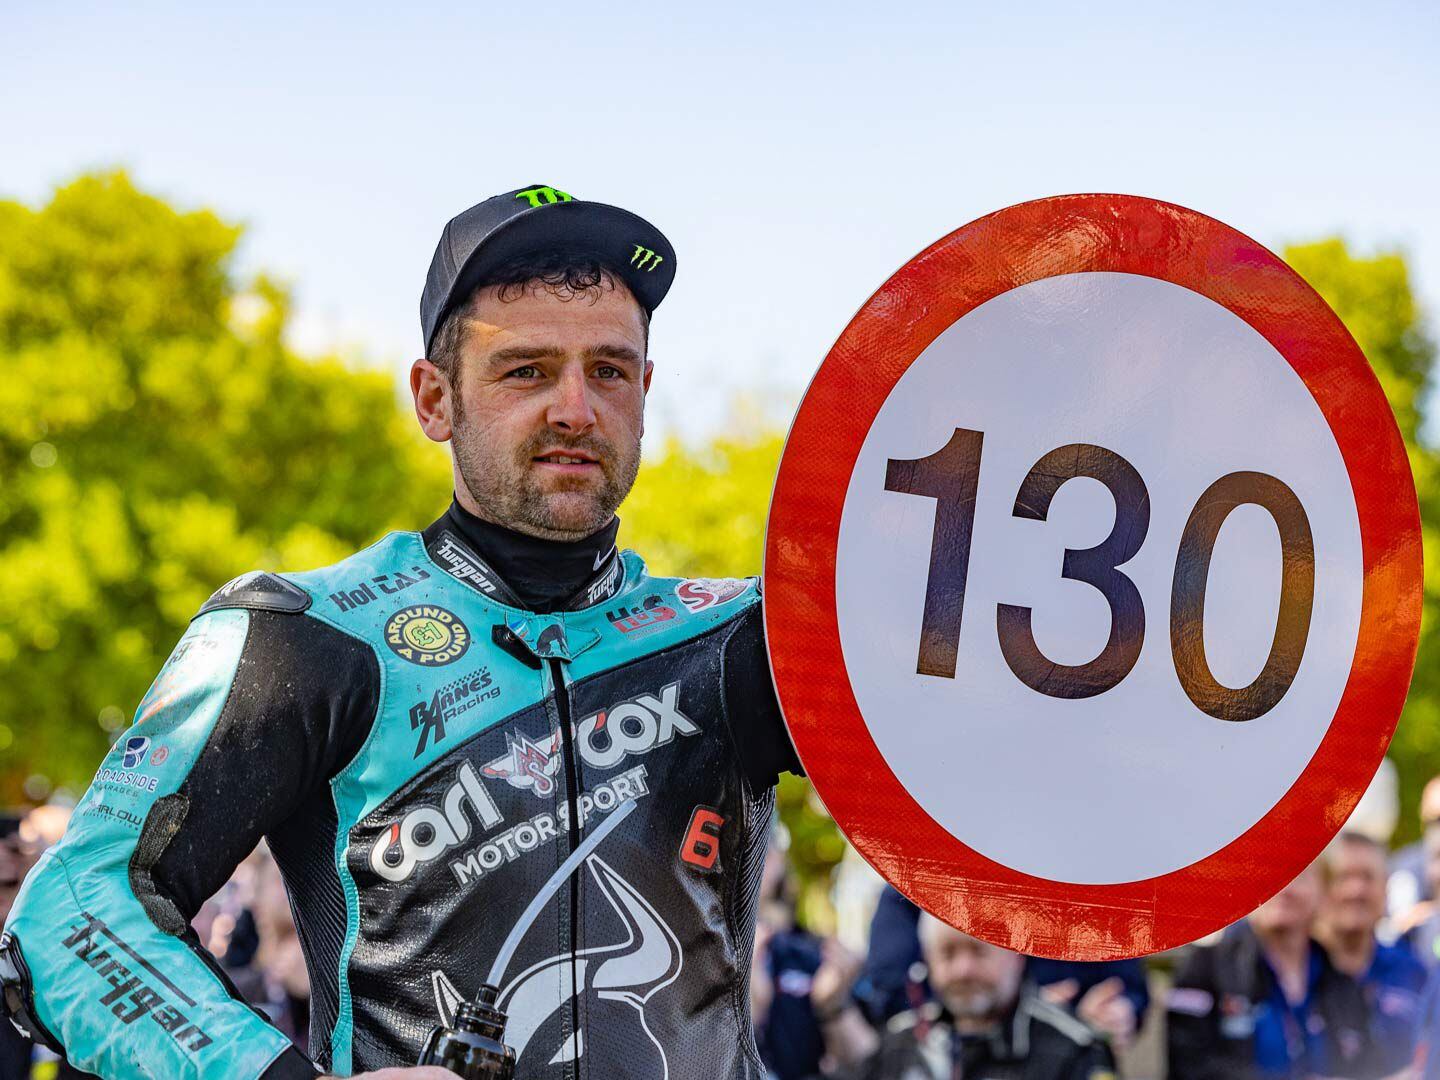 In the winner’s enclosure Michael Dunlop displays his new “Speed Limit” sign for his 130.4 mph record.